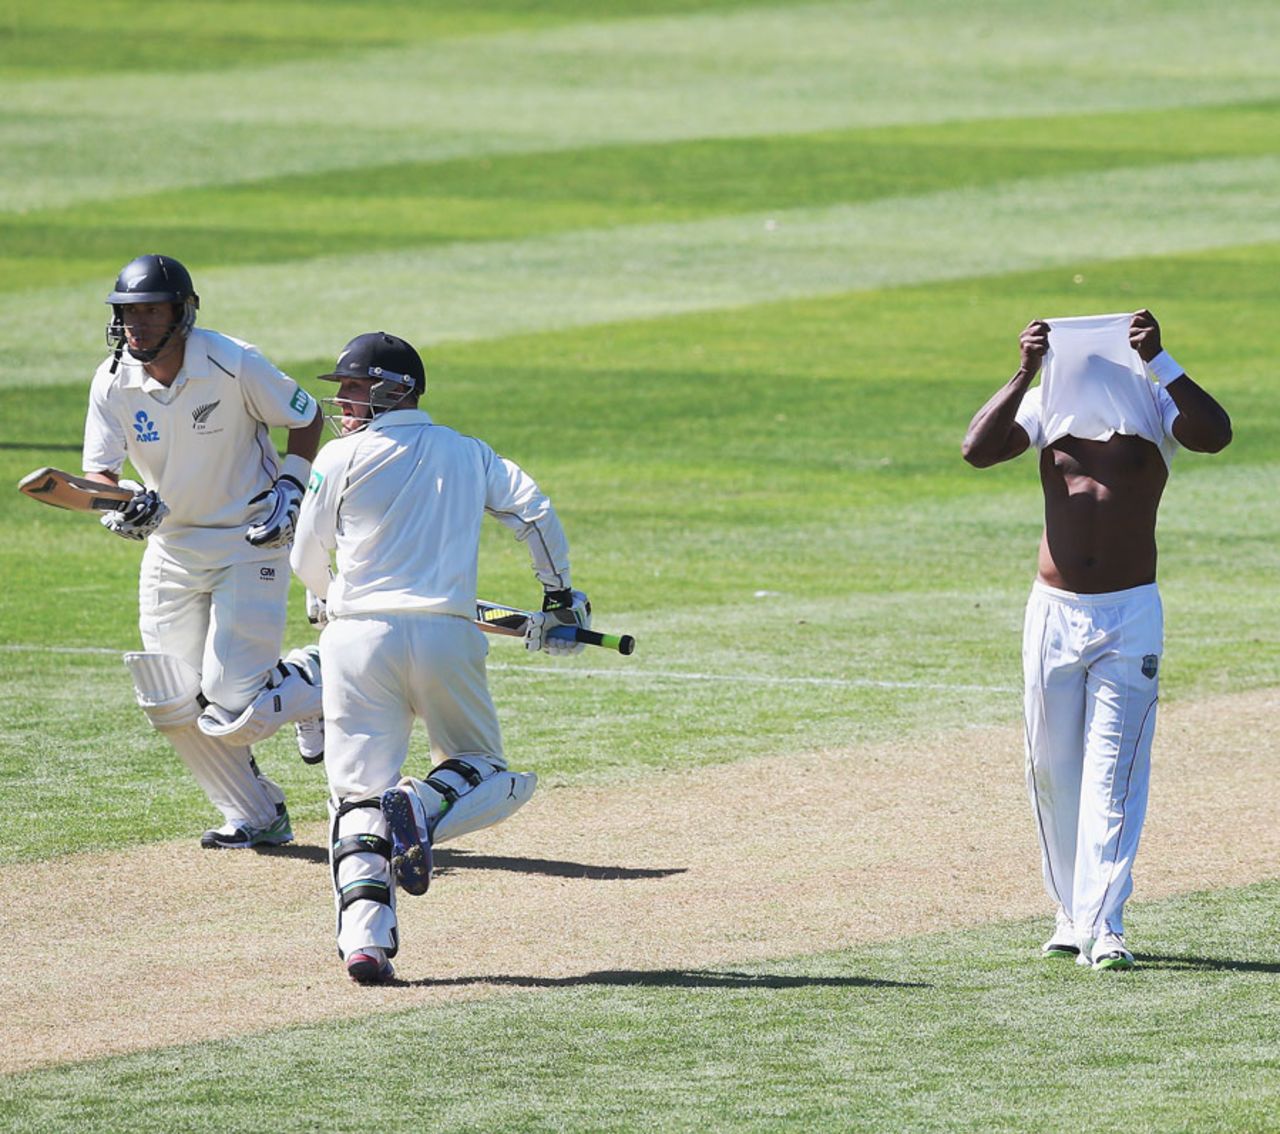 Tino Best exhibits his frustration, New Zealand v West Indies, 1st Test, Dunedin, 1st day, December 3, 2013